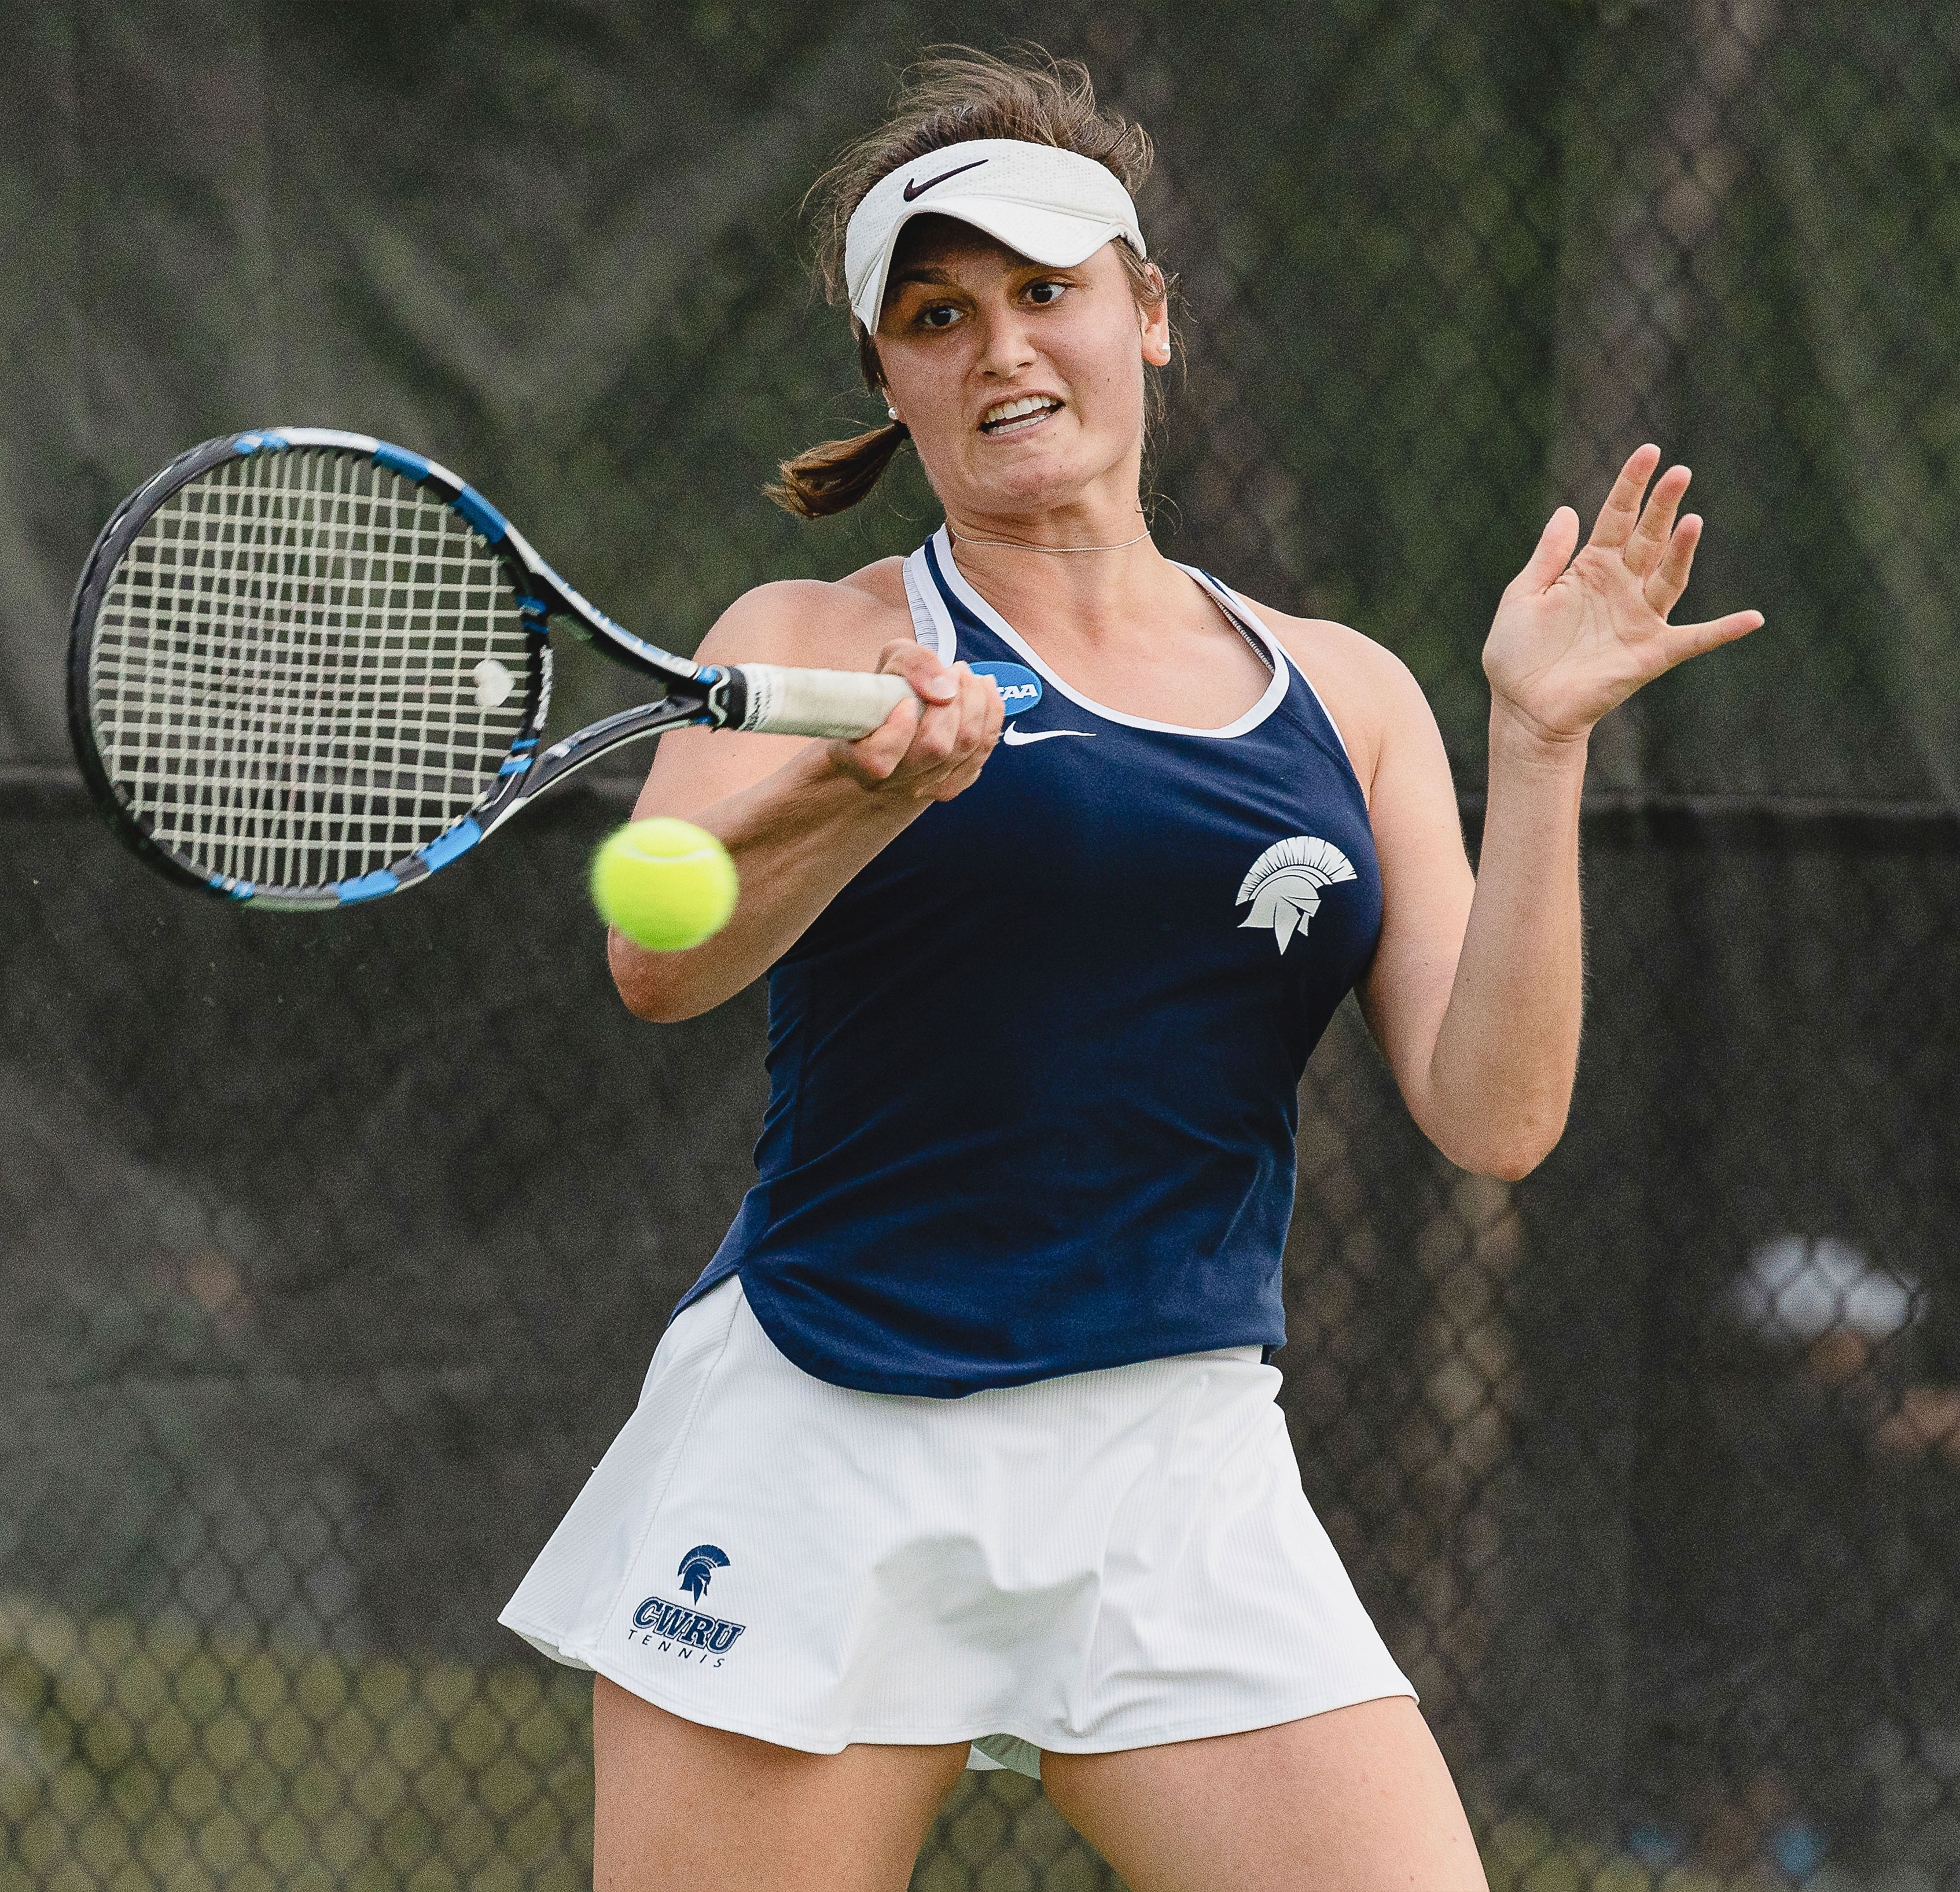 Madeline Paolucci hitting a tennis ball